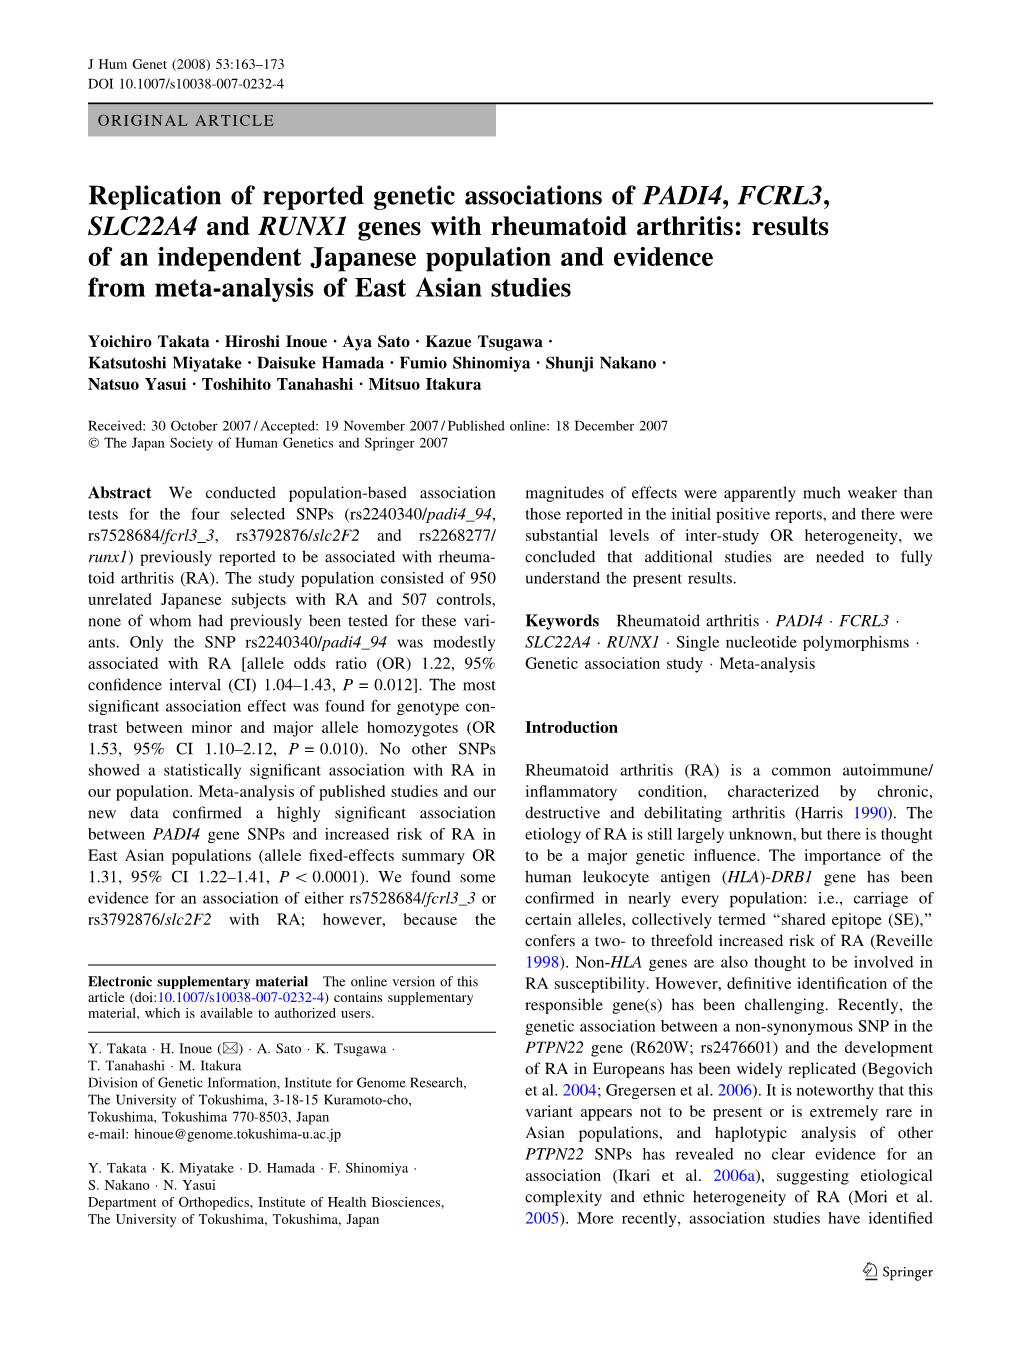 Replication of Reported Genetic Associations of PADI4, FCRL3